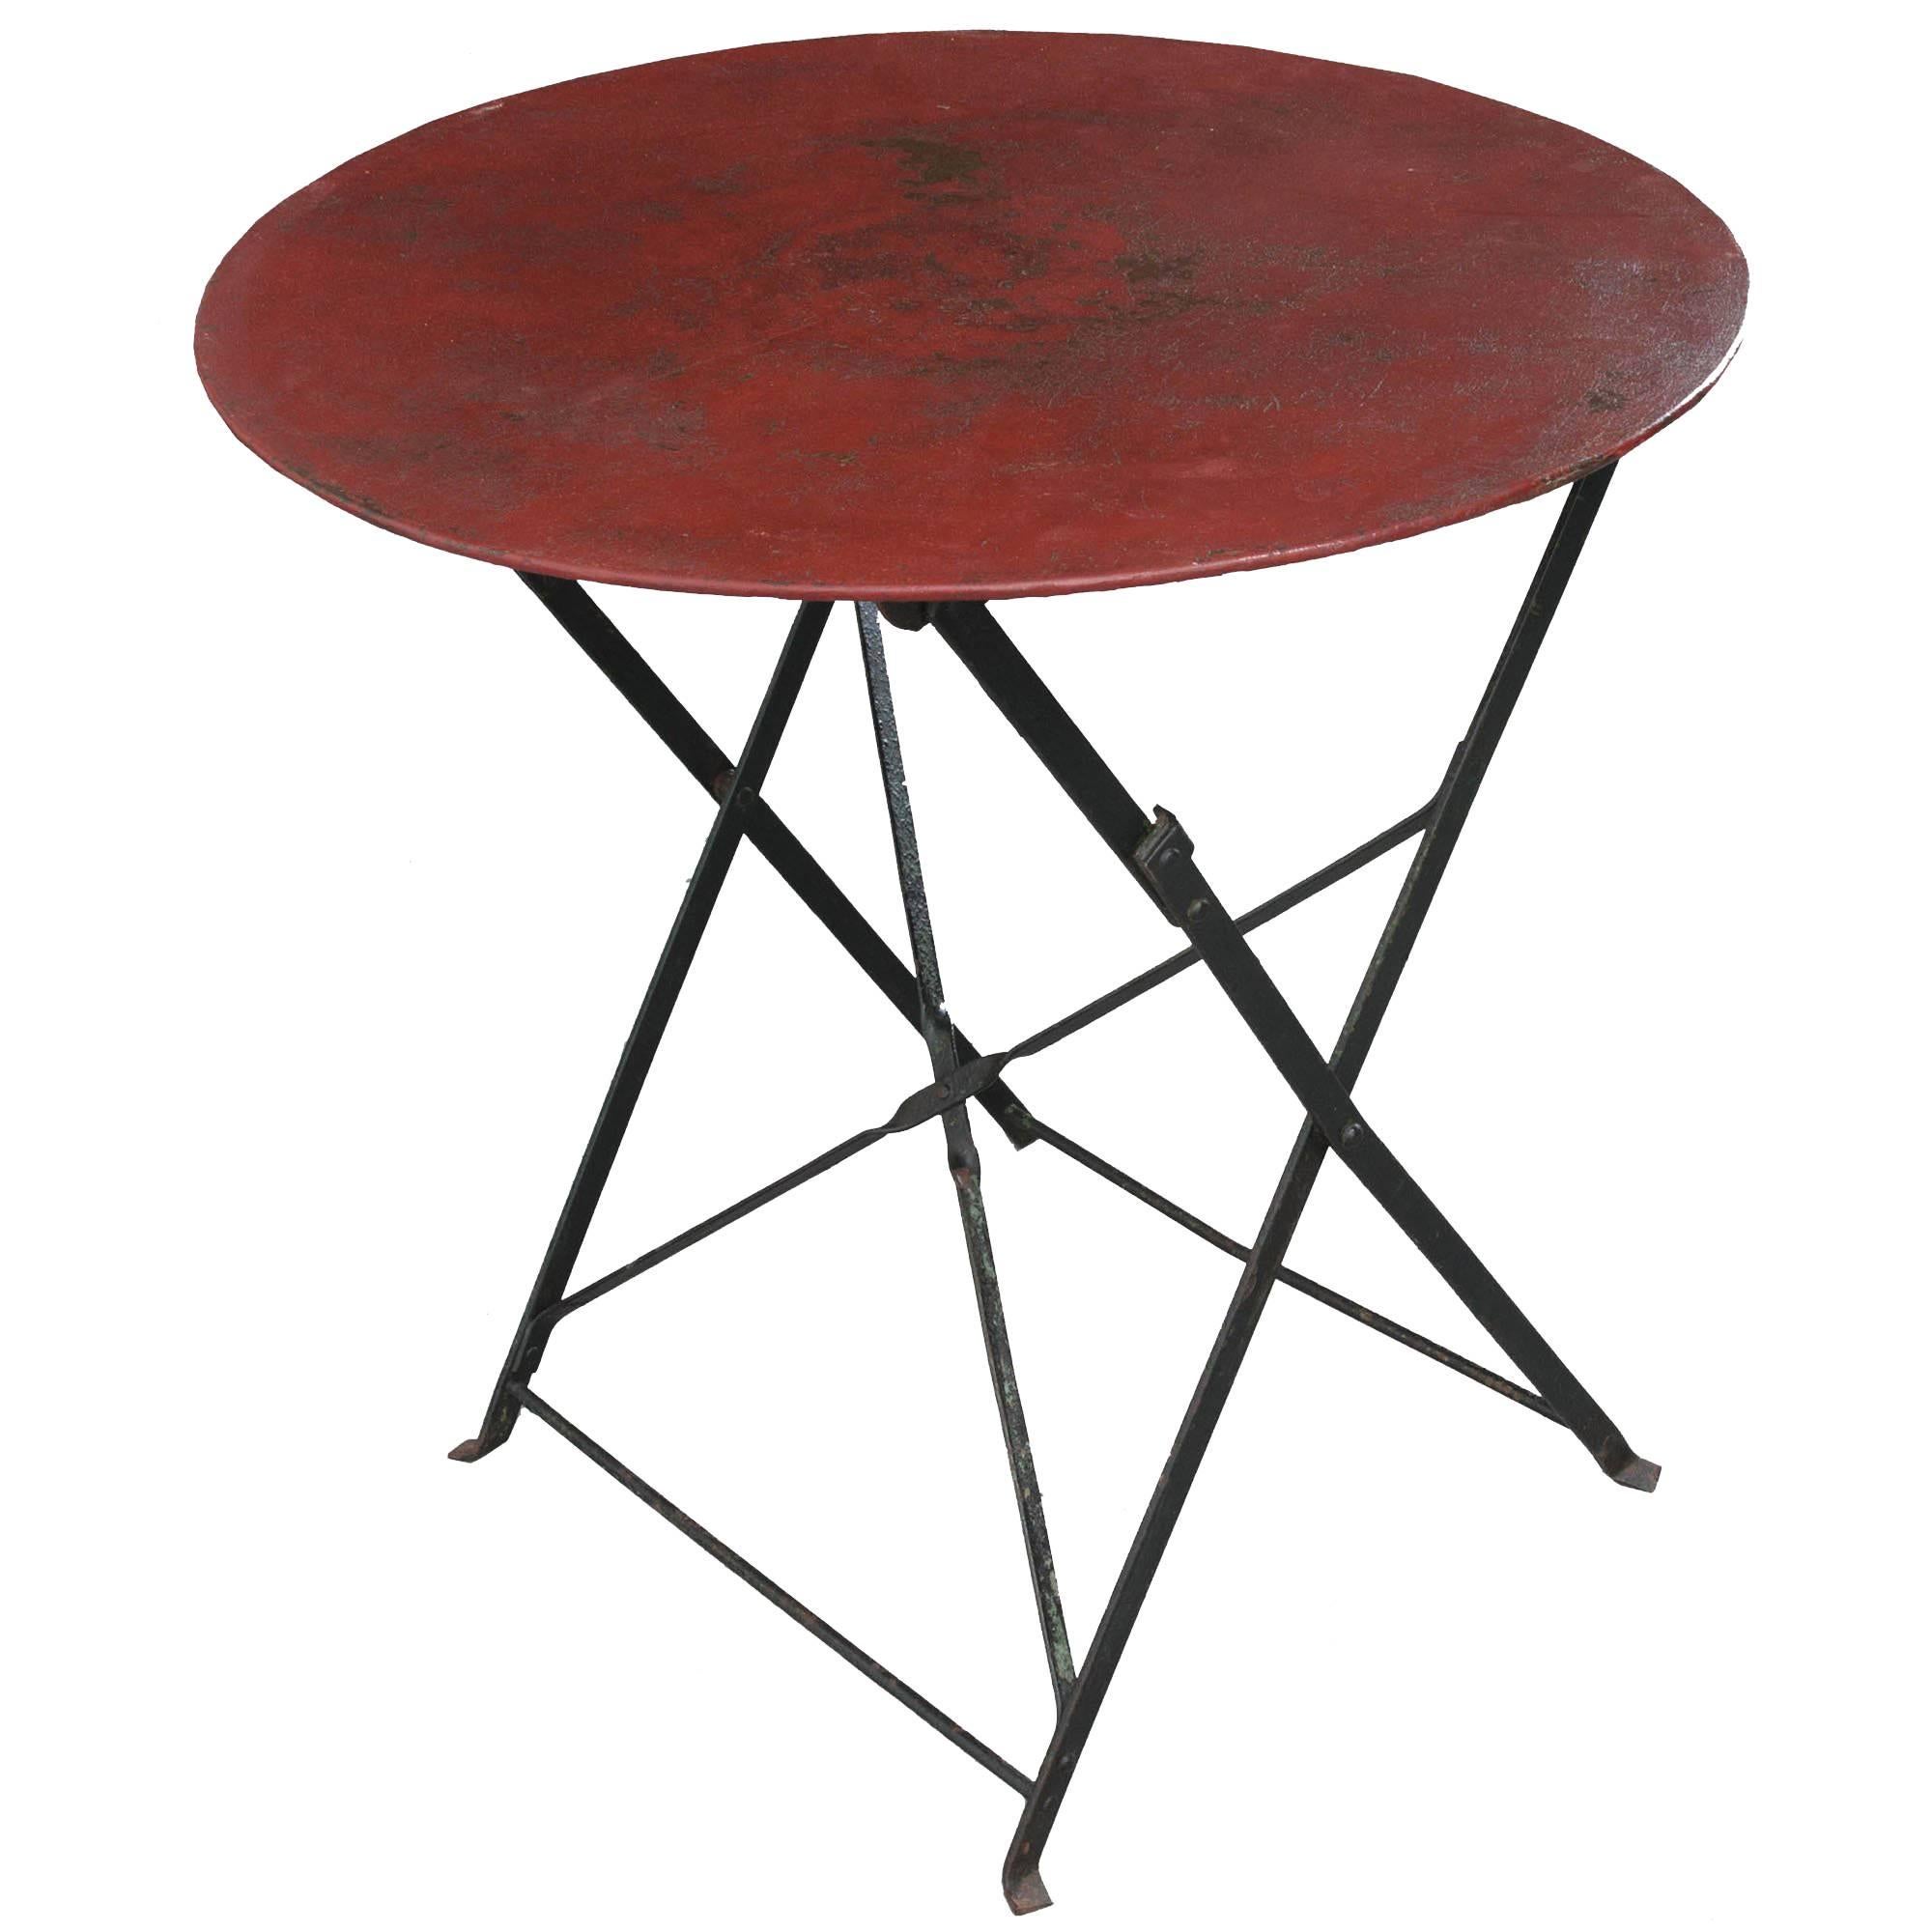 English Early 20th Century Round Metal Folding Table